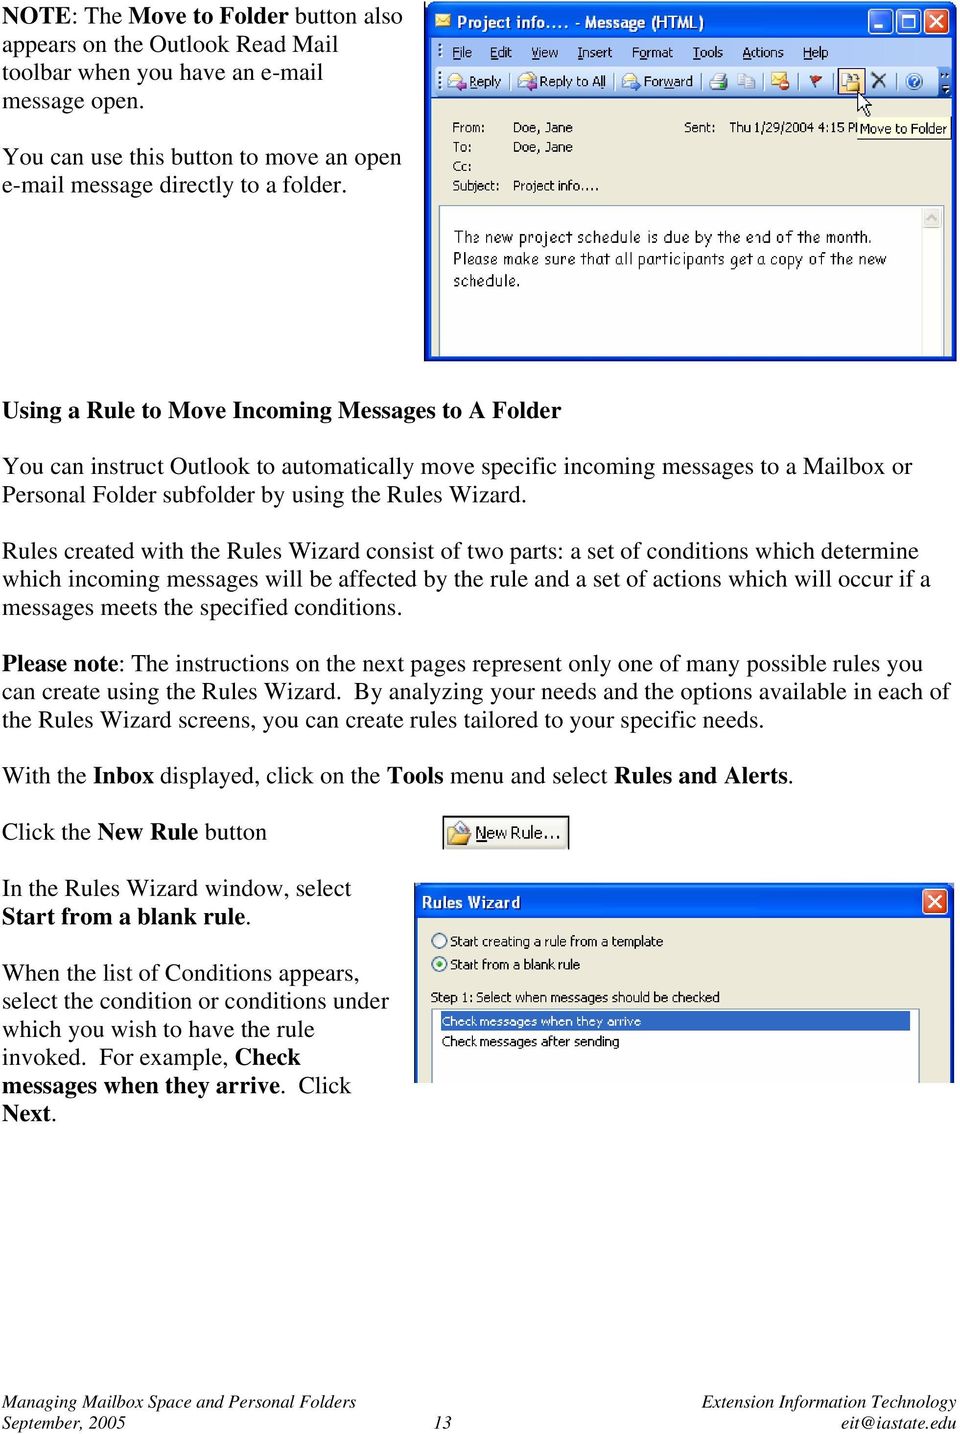 Rules created with the Rules Wizard consist of two parts: a set of conditions which determine which incoming messages will be affected by the rule and a set of actions which will occur if a messages